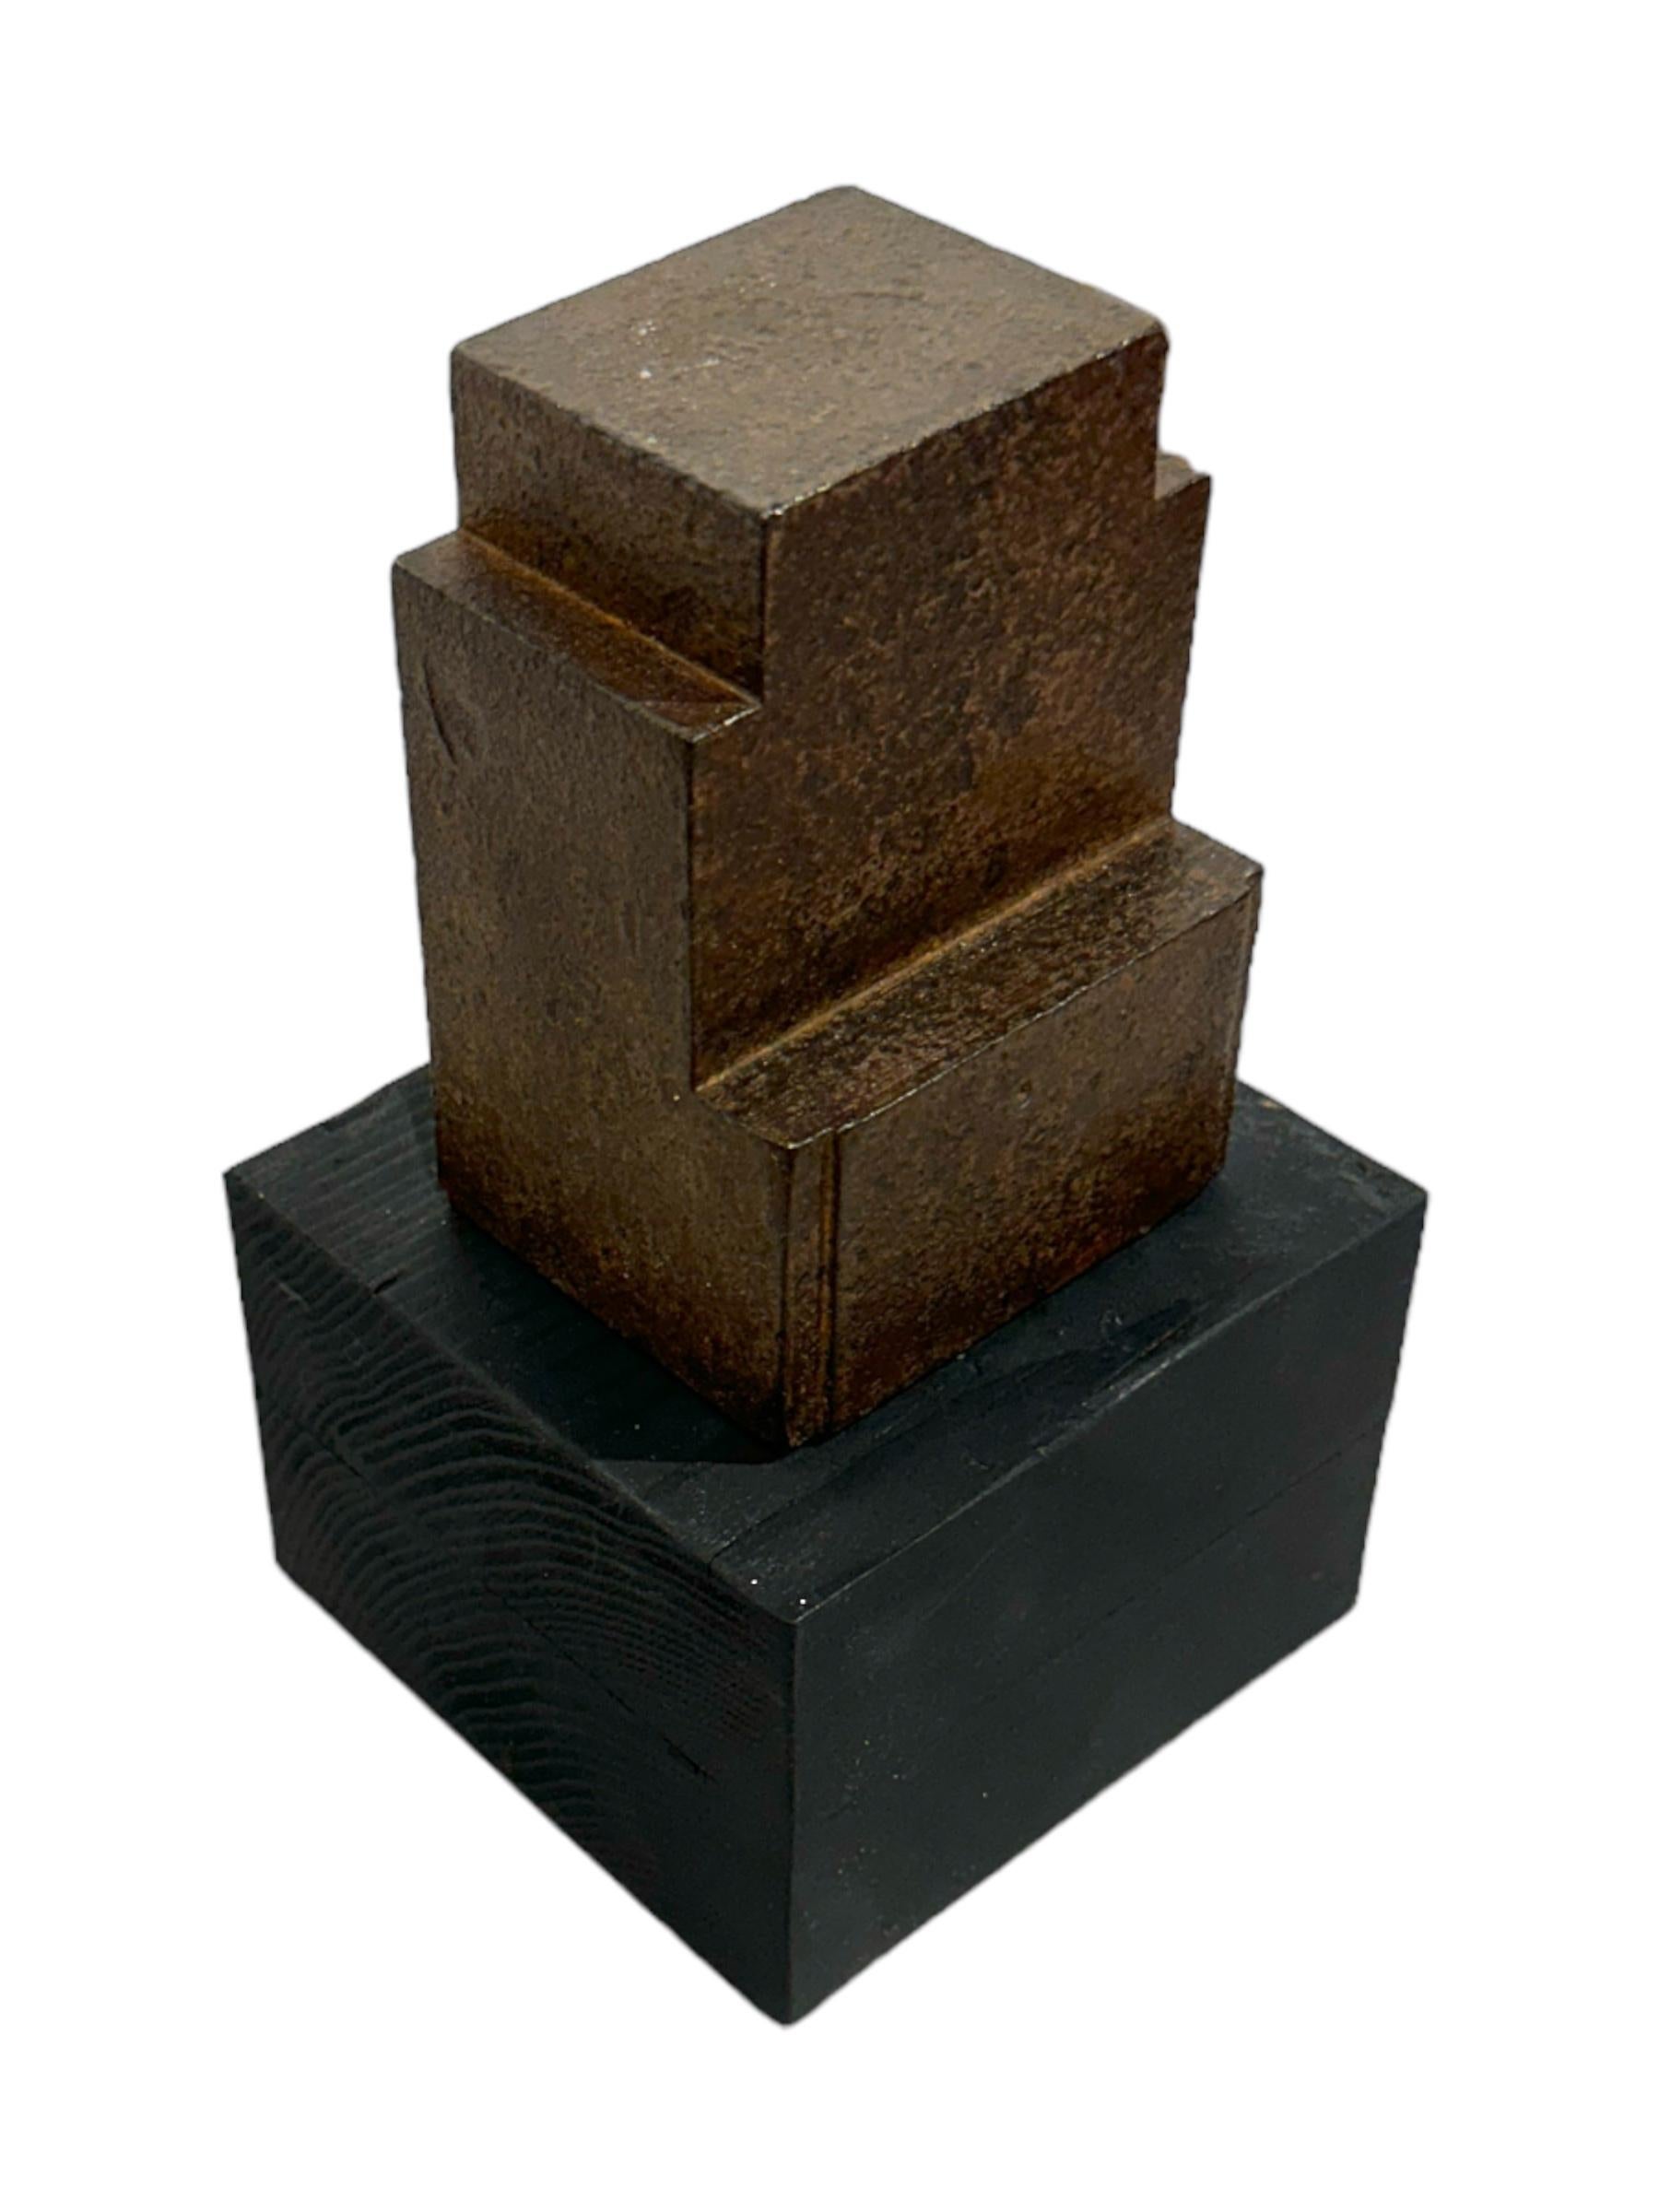 Metal Minimalist Modern Structure, Rusted Steel on Wood Block Base For Sale